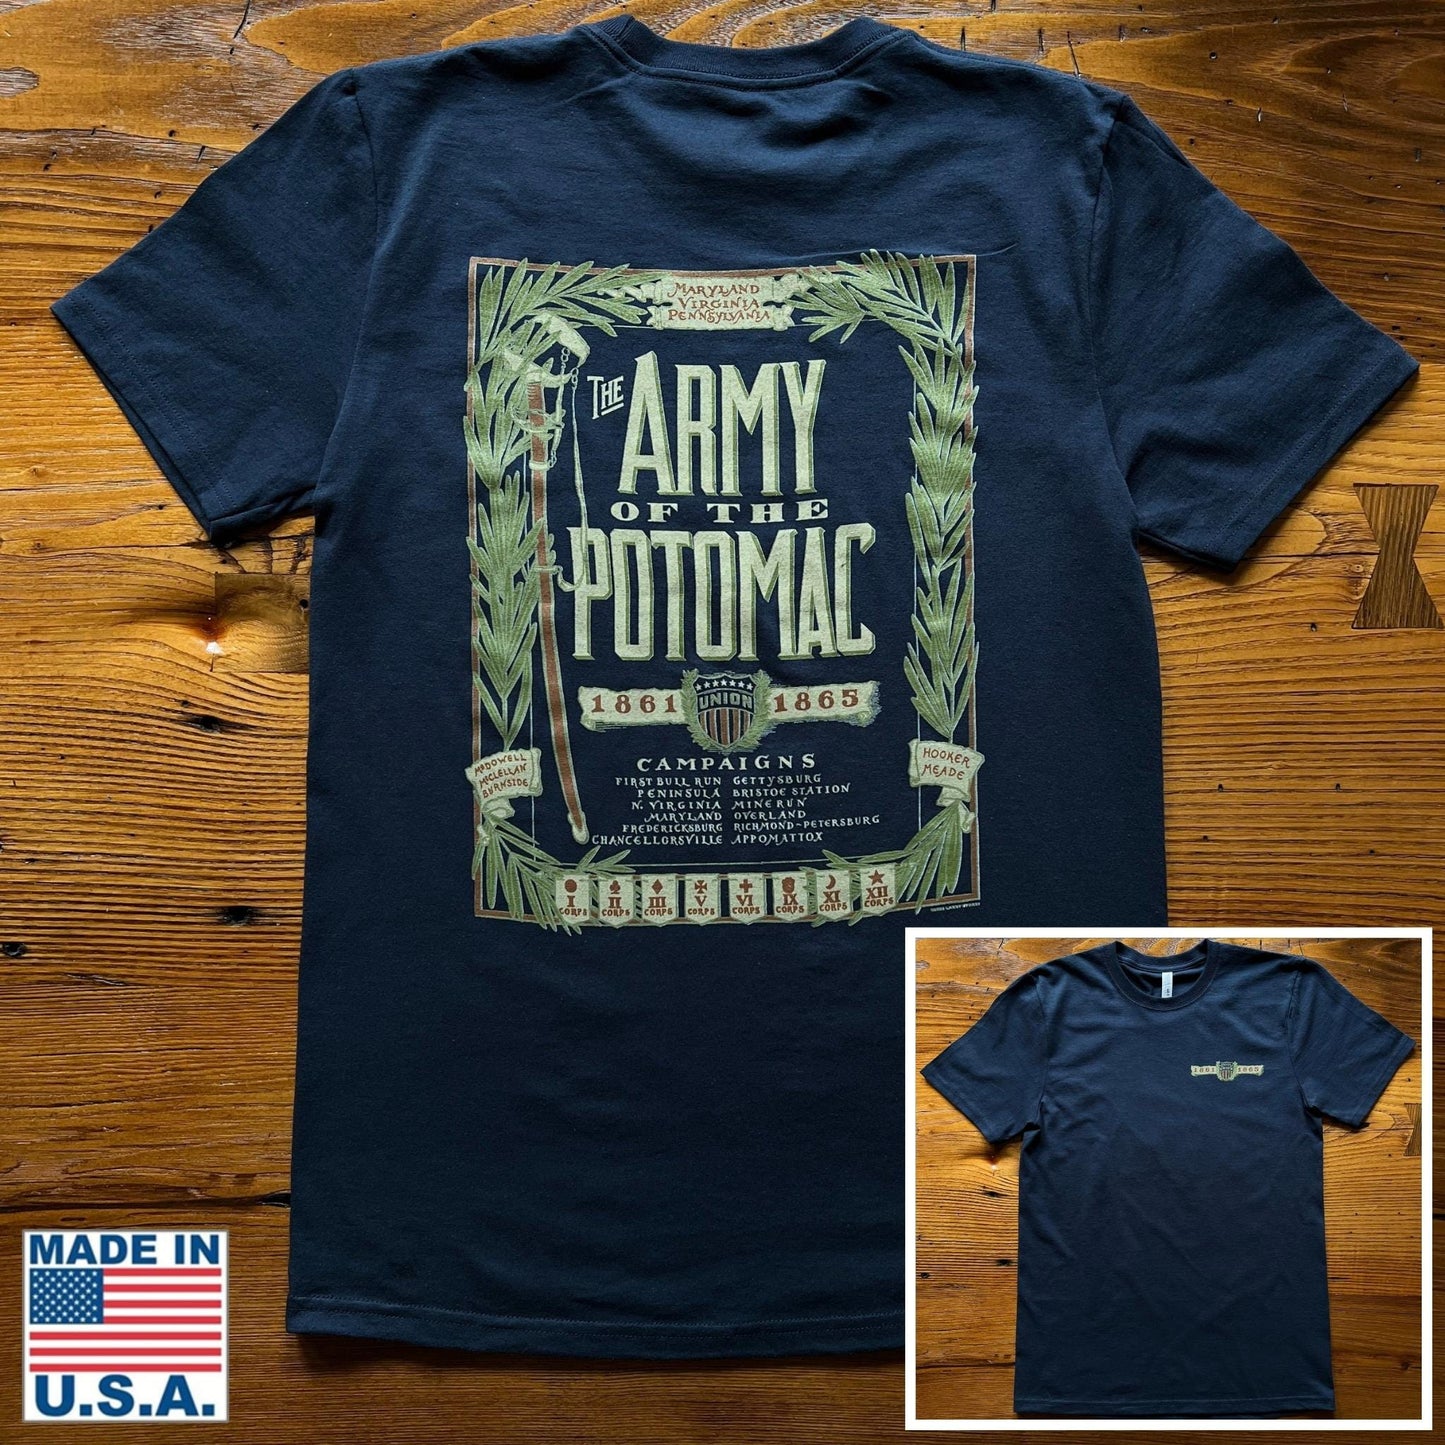 "The Army of the Potomac" Shirt from The History List store